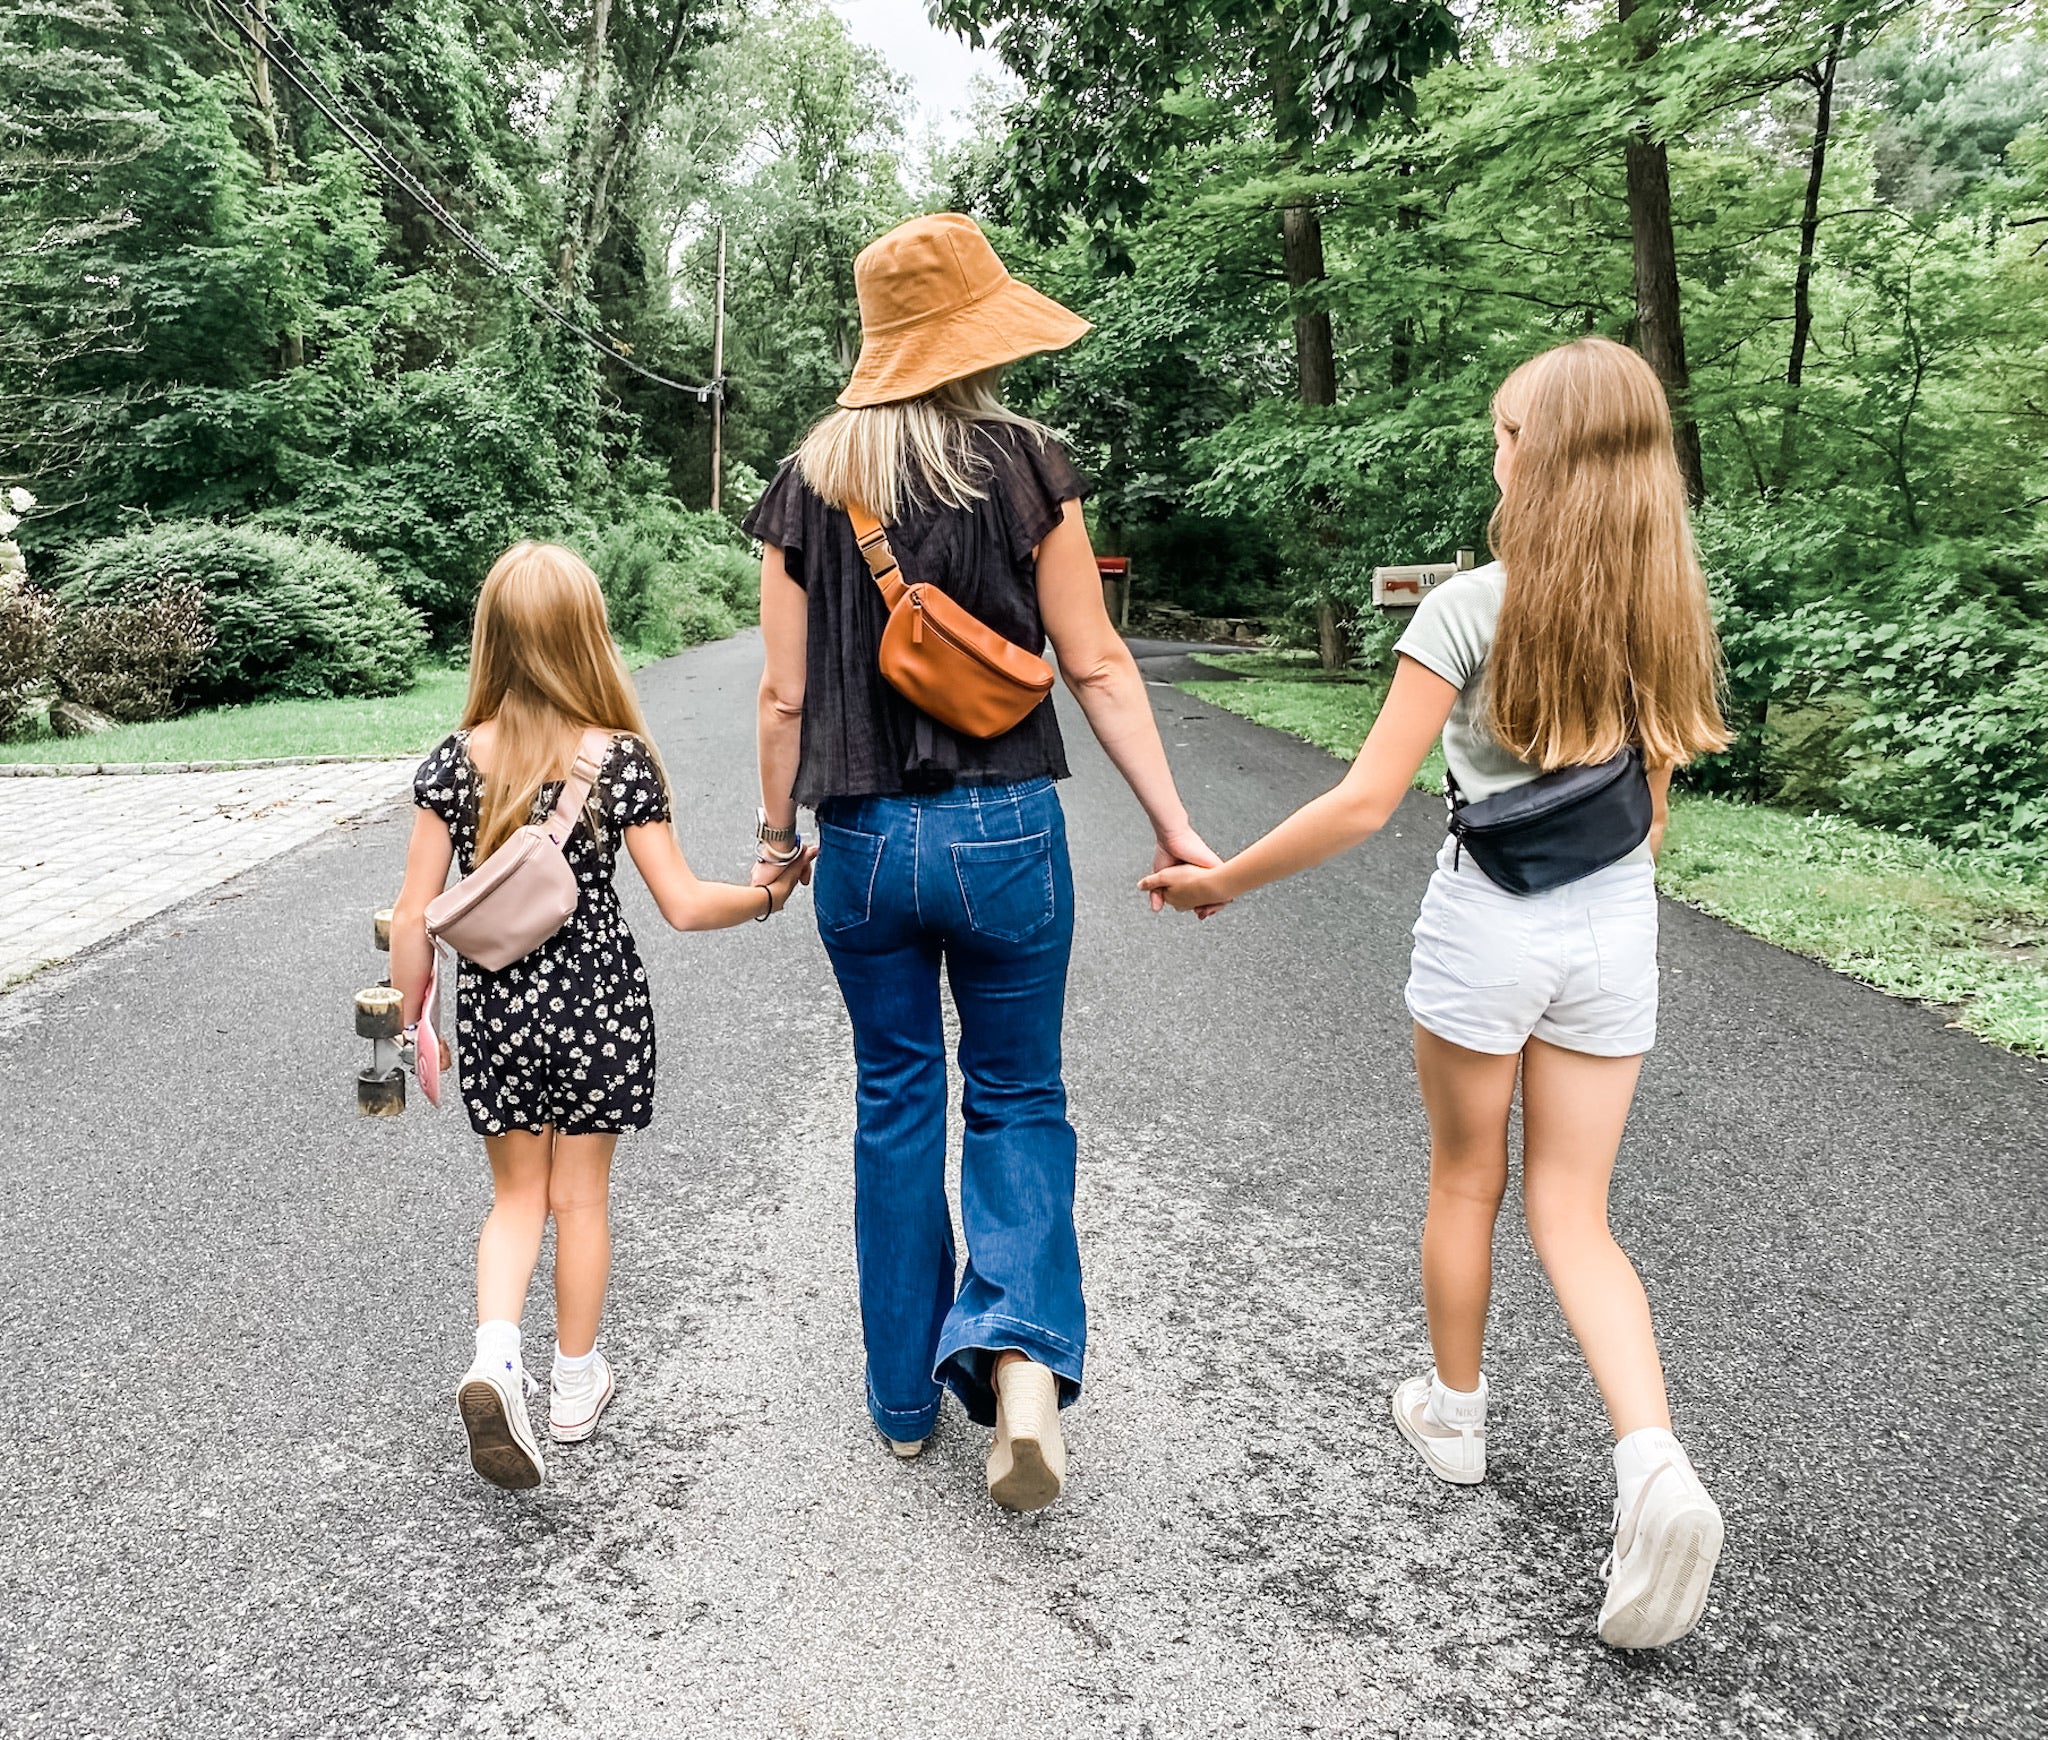 Mom and daughters on a walk in the country holding hands and all wearing Kibou Mini fanny packs